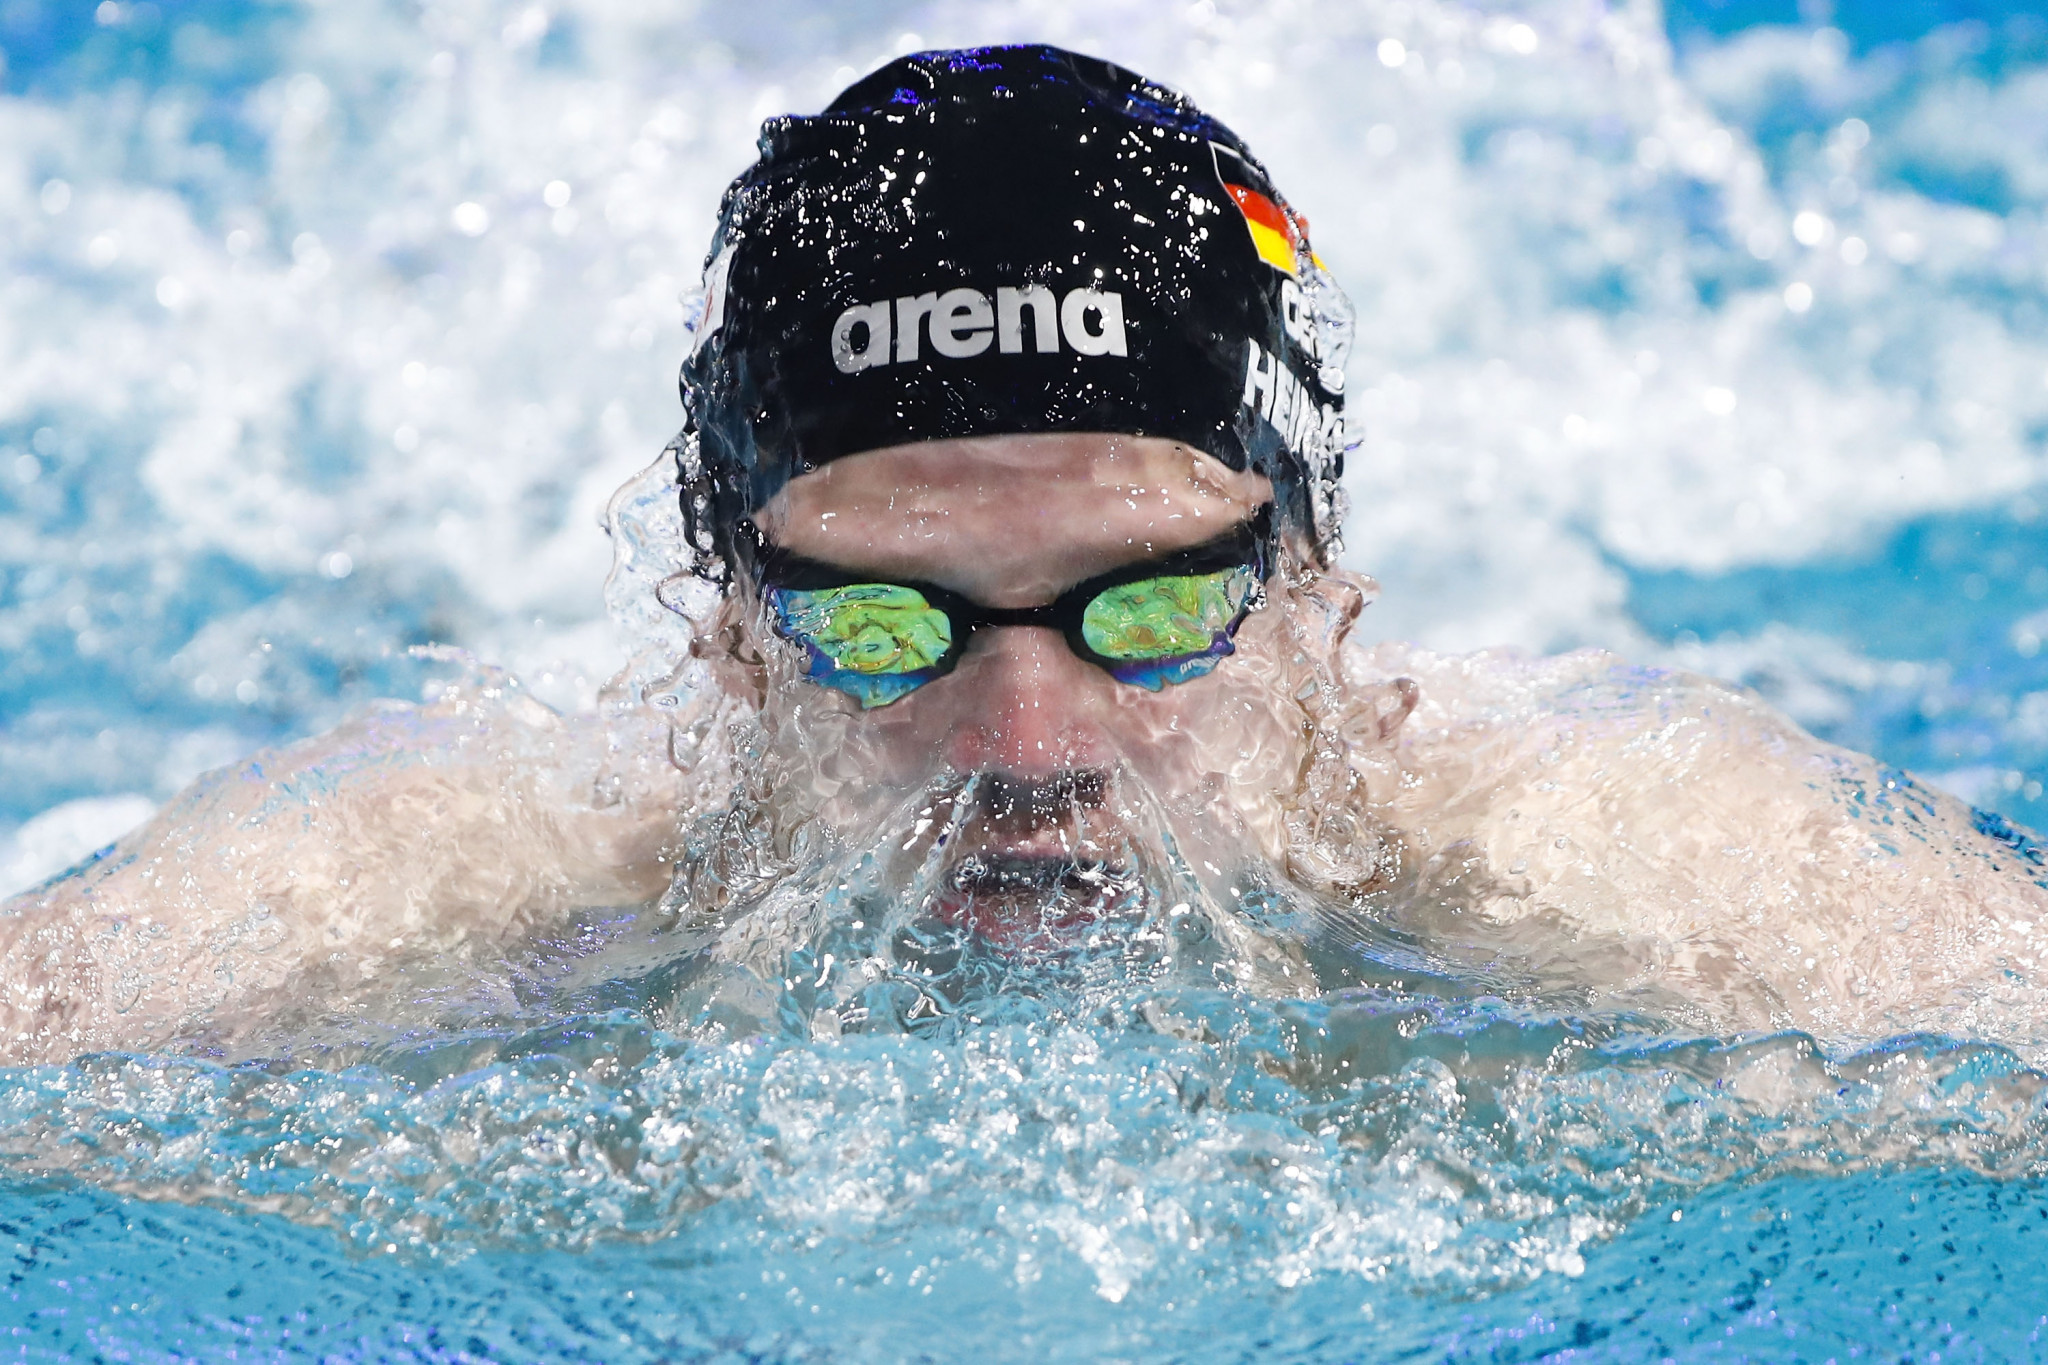 Germany's Philip Heintz topped the men's 200m individual medley podium ©Getty Images